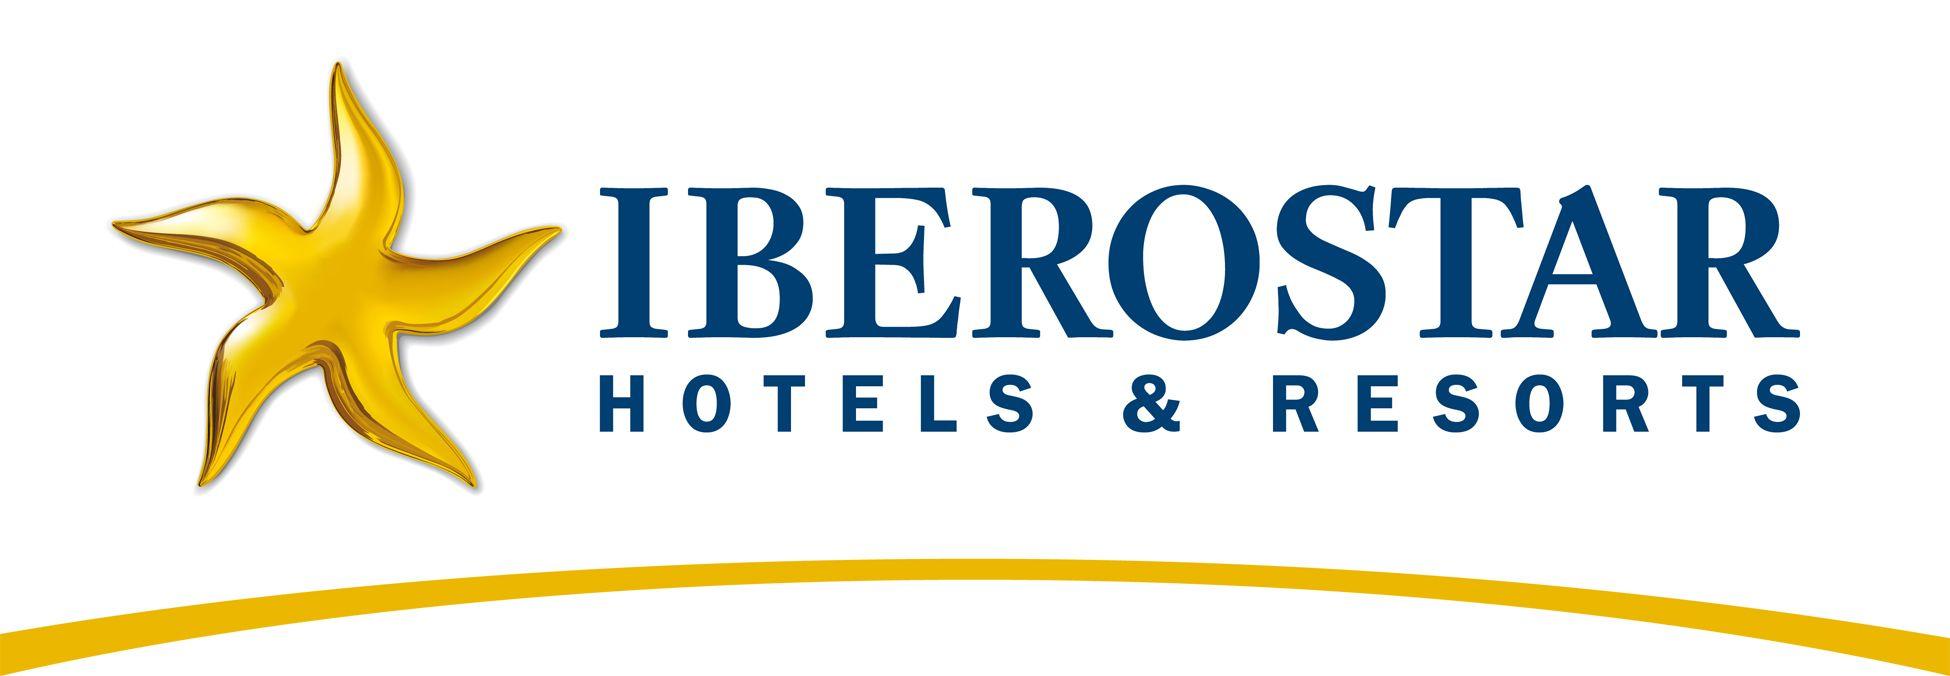 Iberostar Logo - The Gecko Tour and Iberostar Hotels & Resorts join forces for Ernie